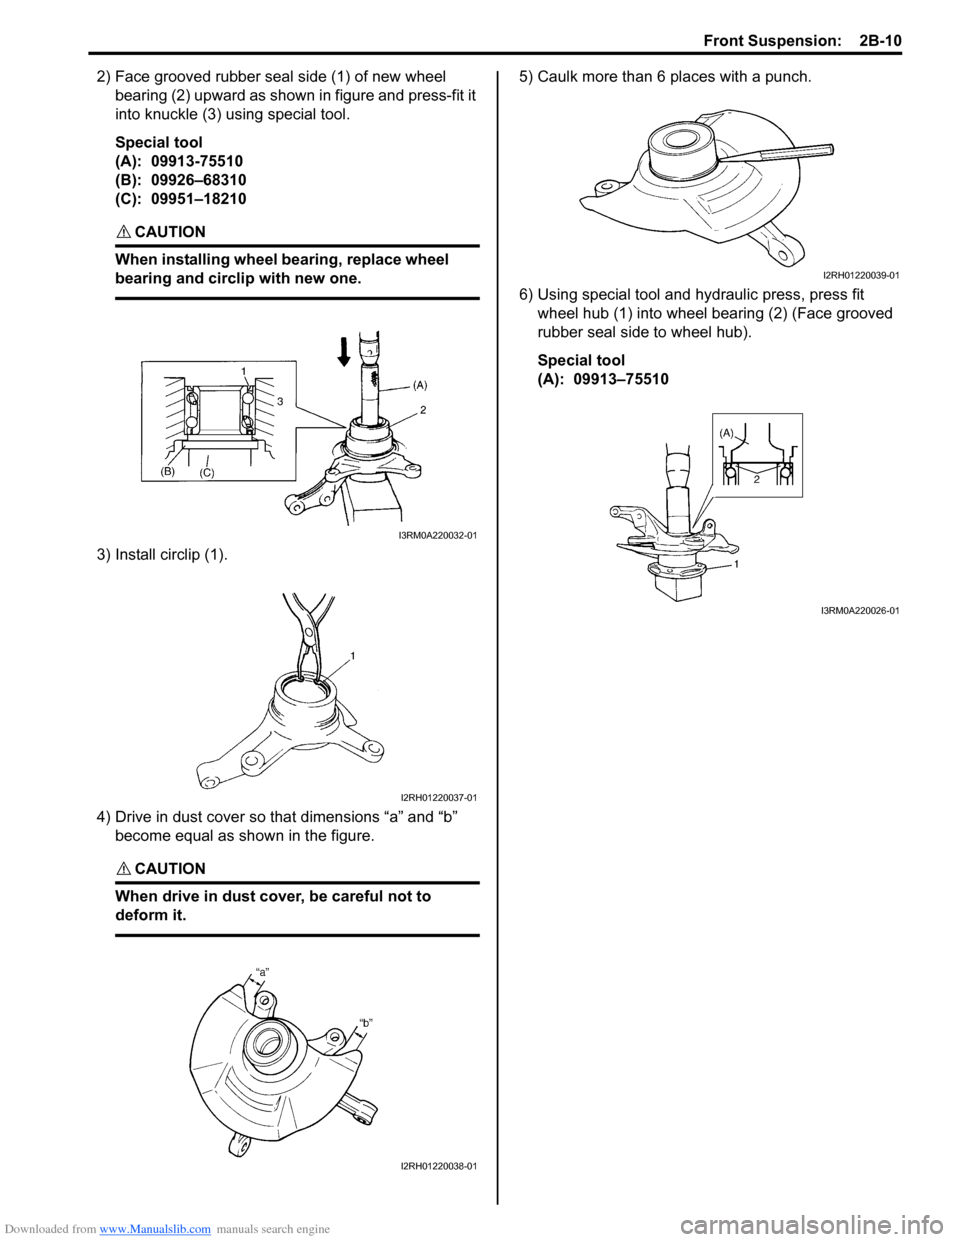 SUZUKI SWIFT 2007 2.G Service Workshop Manual Downloaded from www.Manualslib.com manuals search engine Front Suspension:  2B-10
2) Face grooved rubber seal side (1) of new wheel bearing (2) upward as shown in figure and press-fit it 
into knuckle